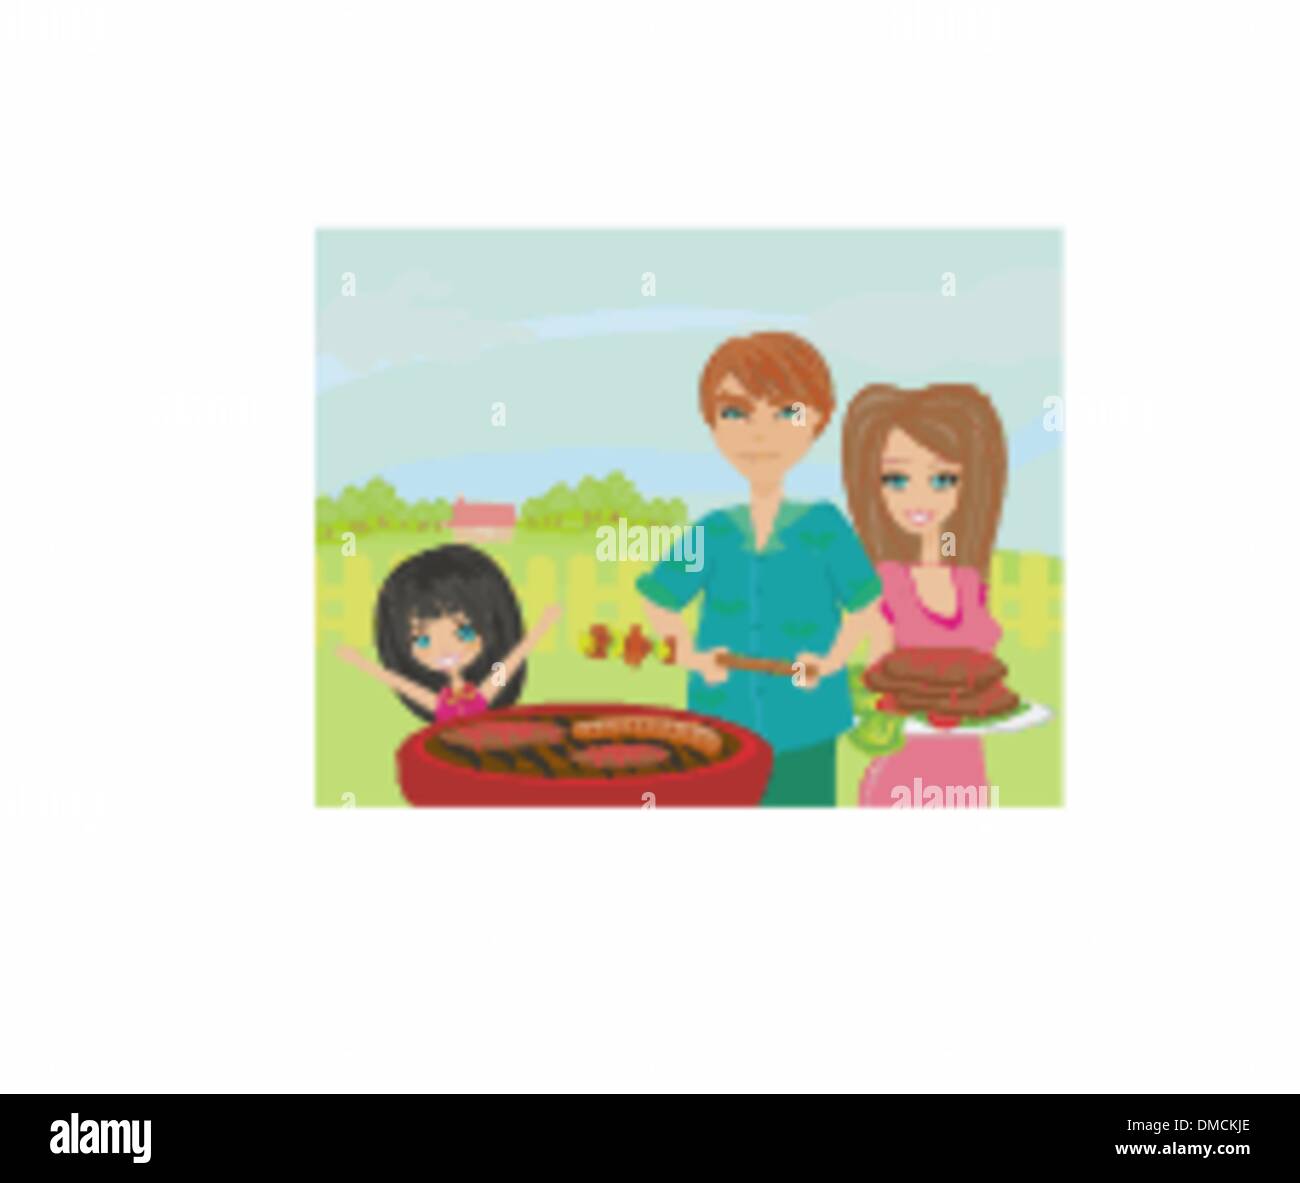 A vector illustration of a family having a picnic in a park Stock Vector